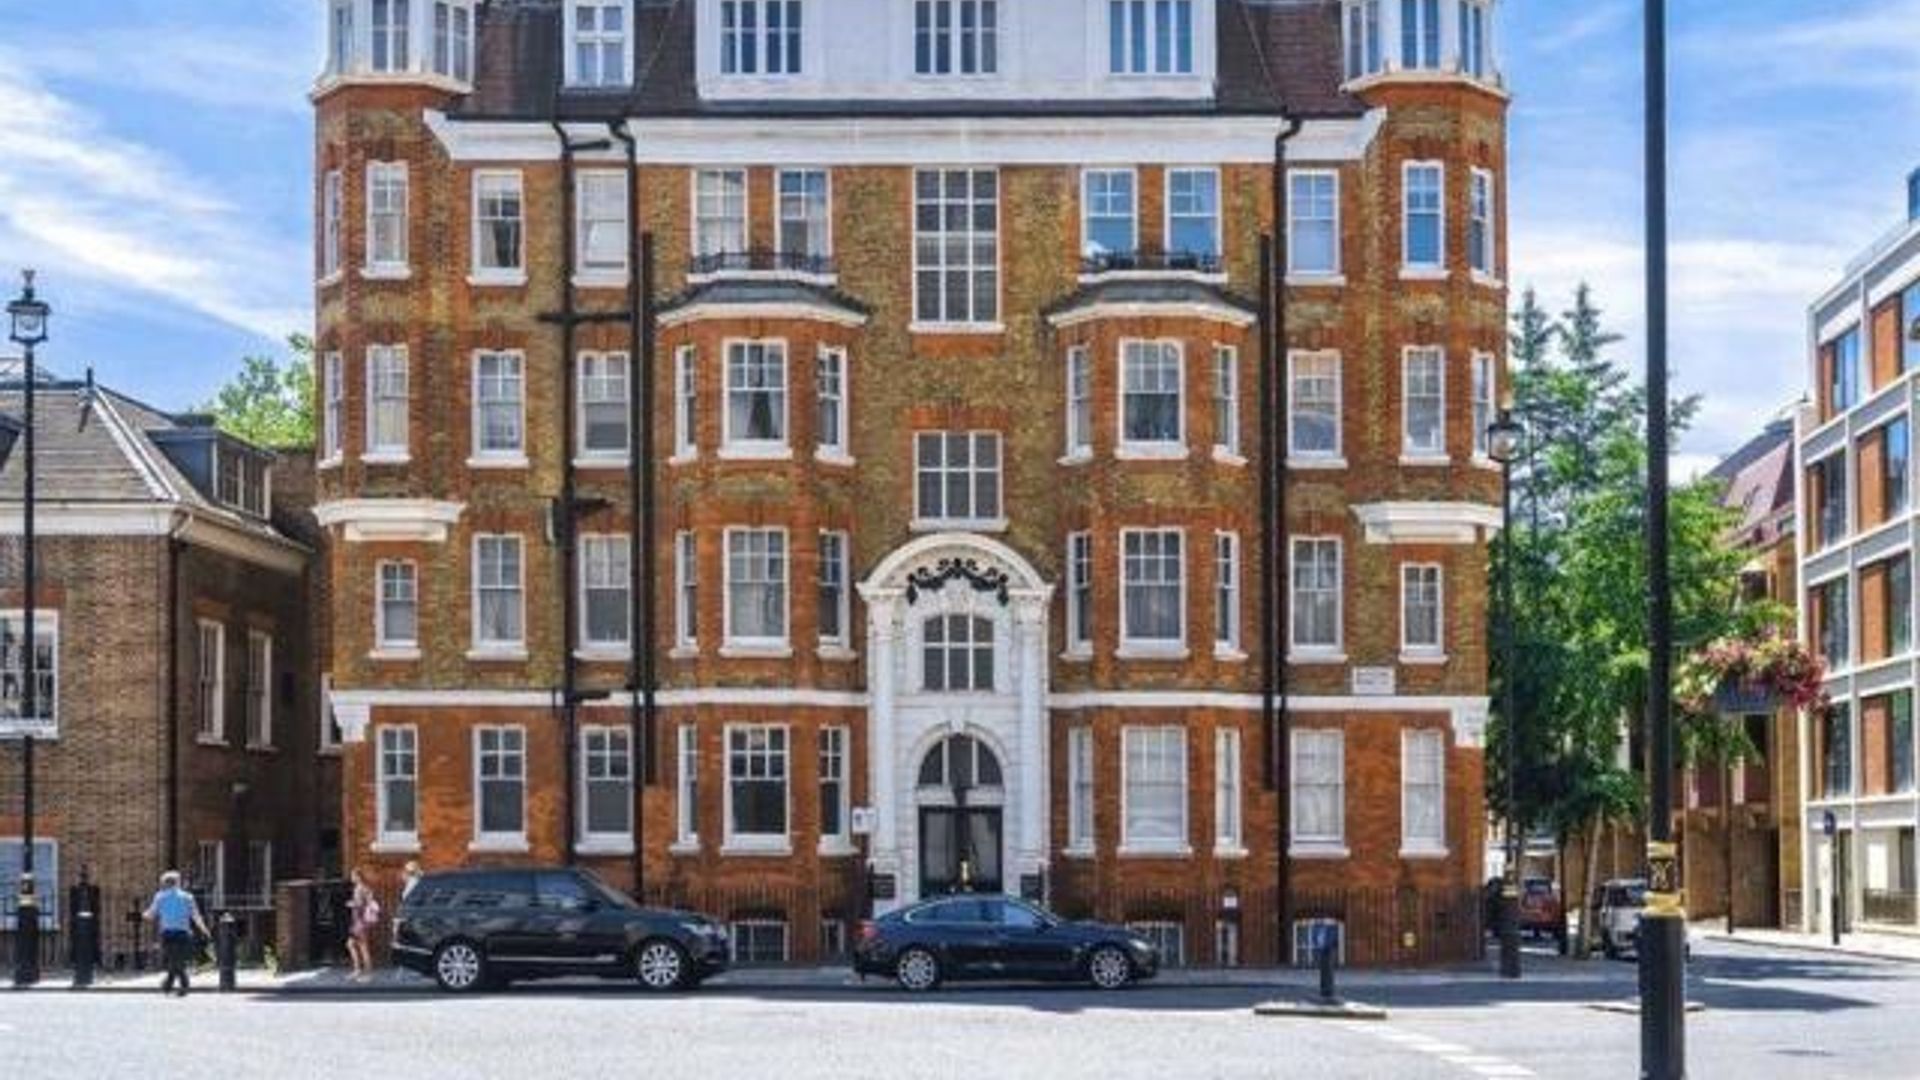 2-bedroom-apartment-at-grey-coat-hospital-school-horseferry-road-westminster-london-sw1p-2dy